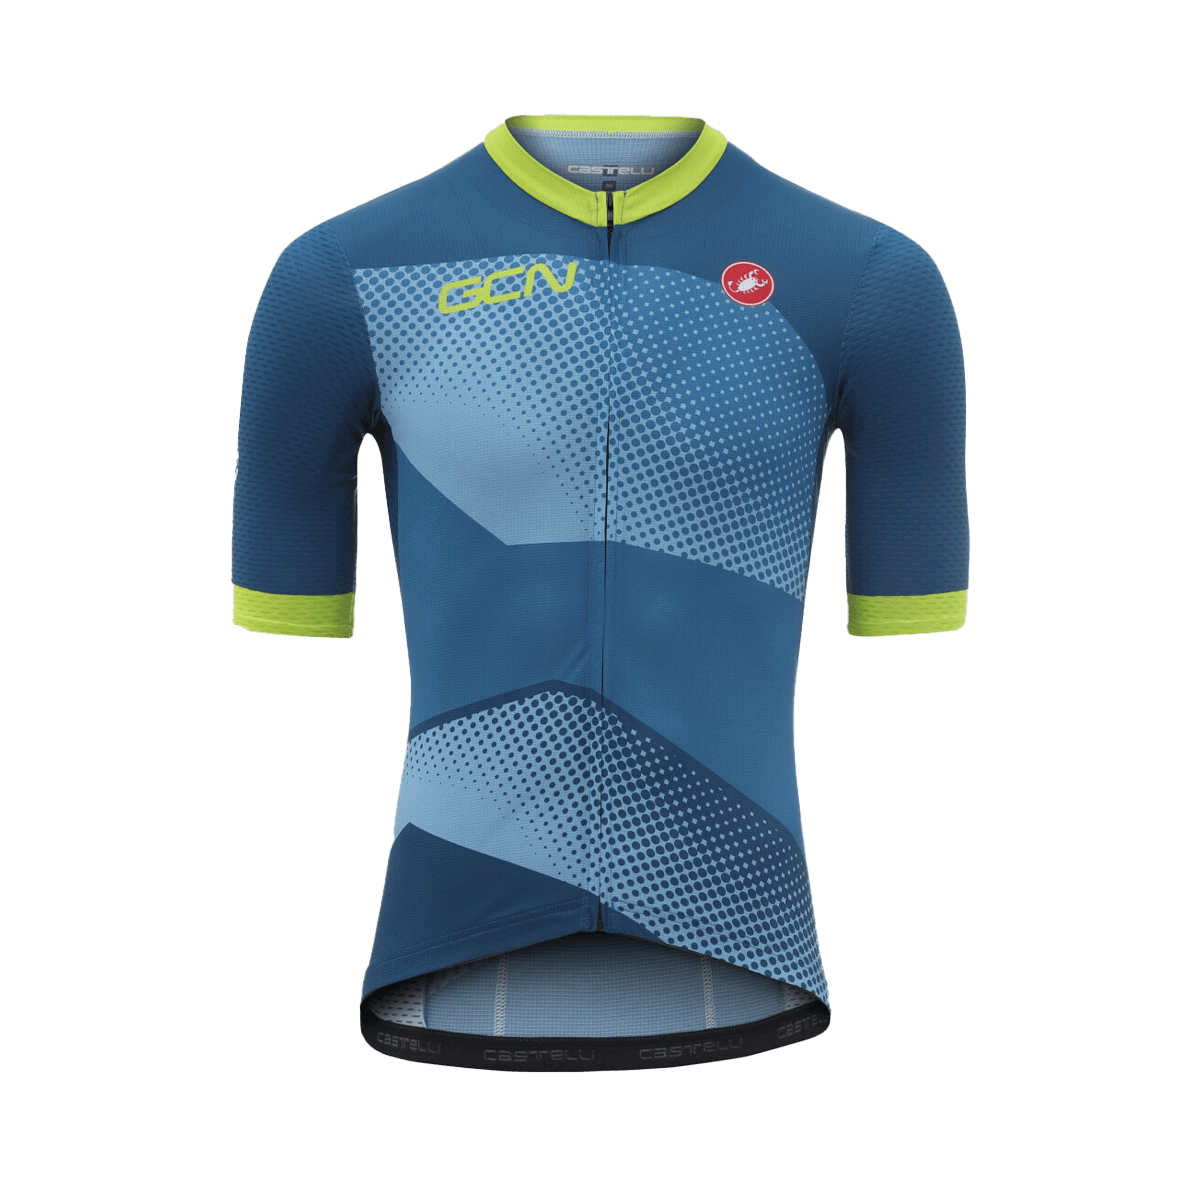 GCN Castelli Competizione Blue and Lime Jersey | GCN Shop ...